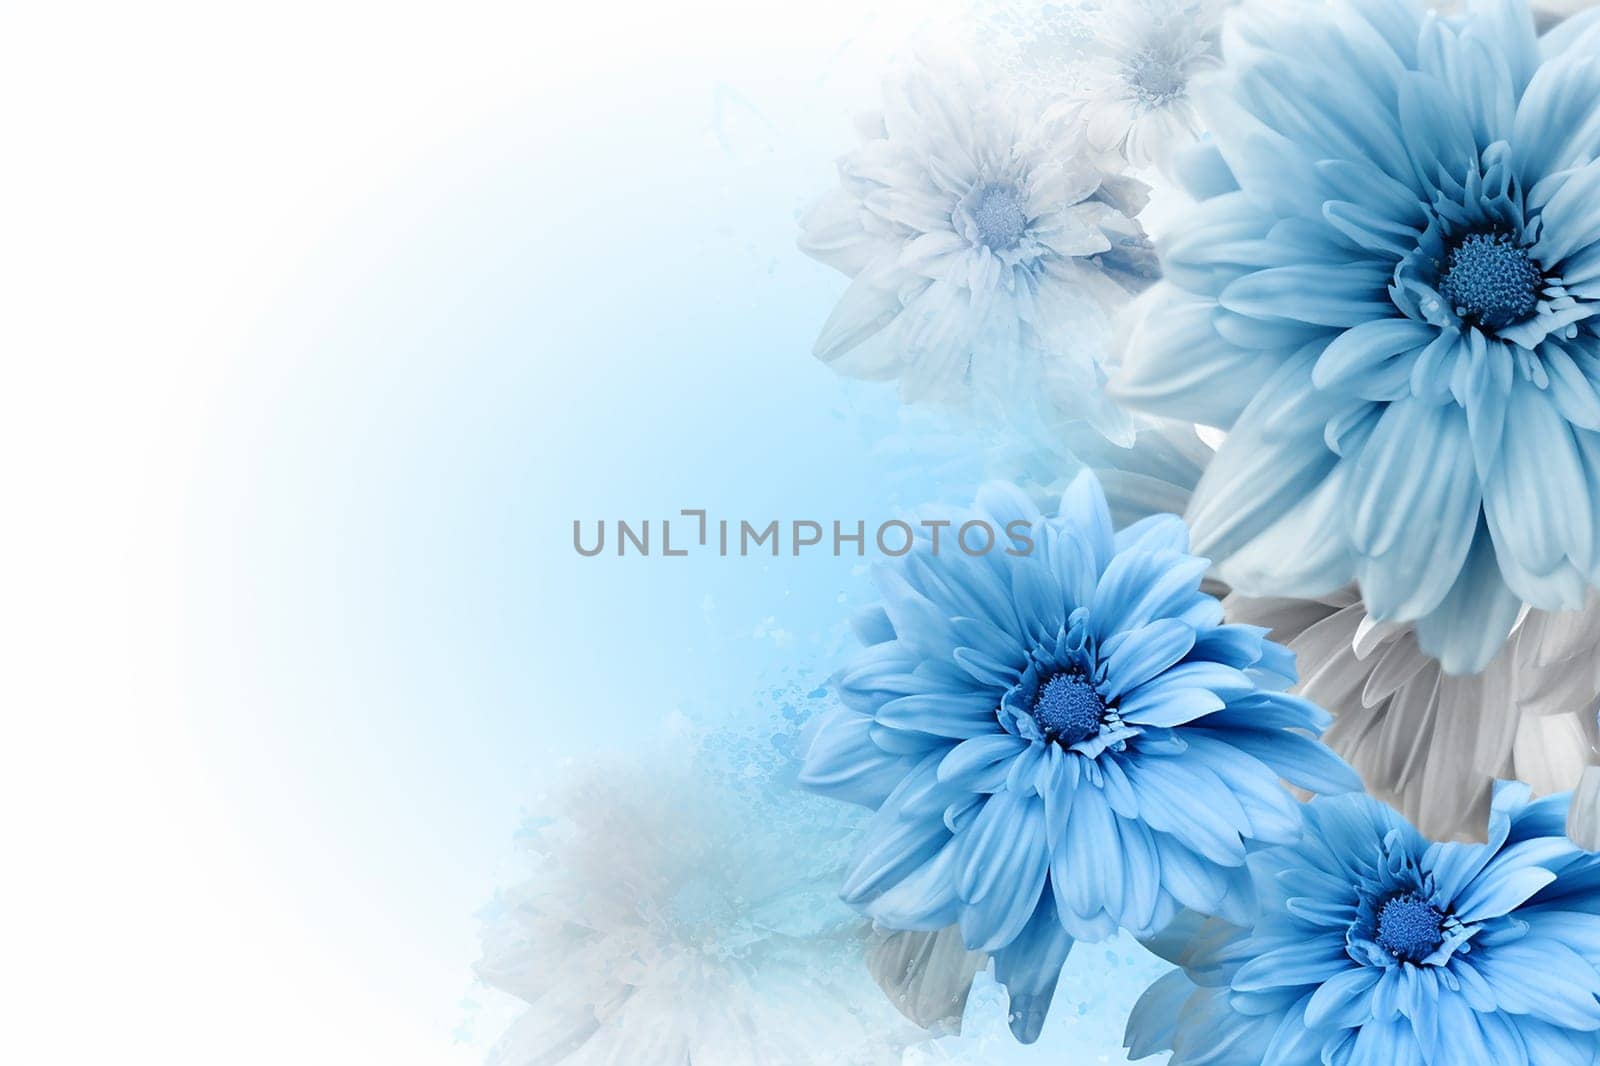 Light blue flowers bloom against a soft white background.